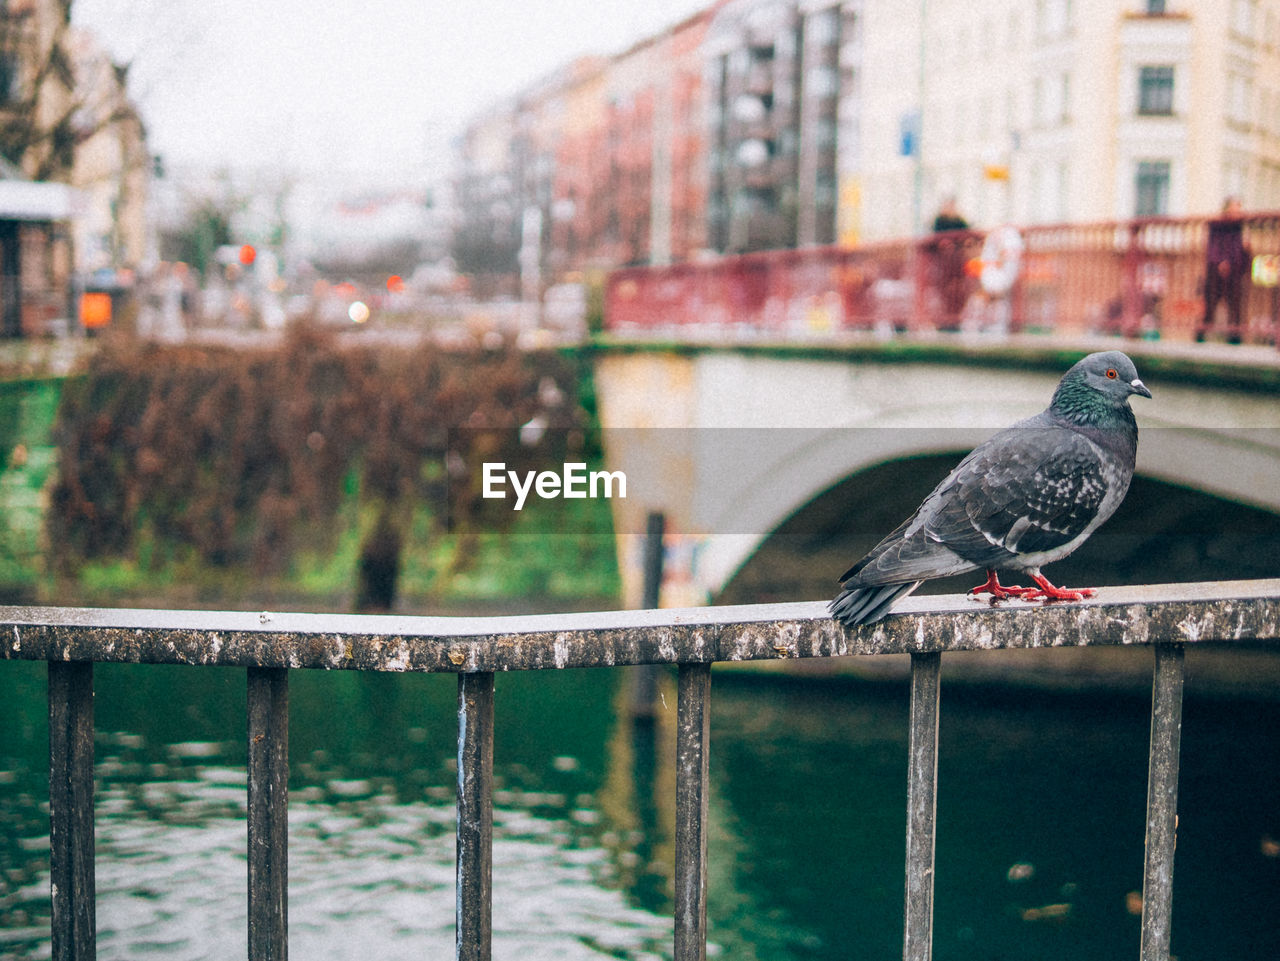 Pigeon on railing in city